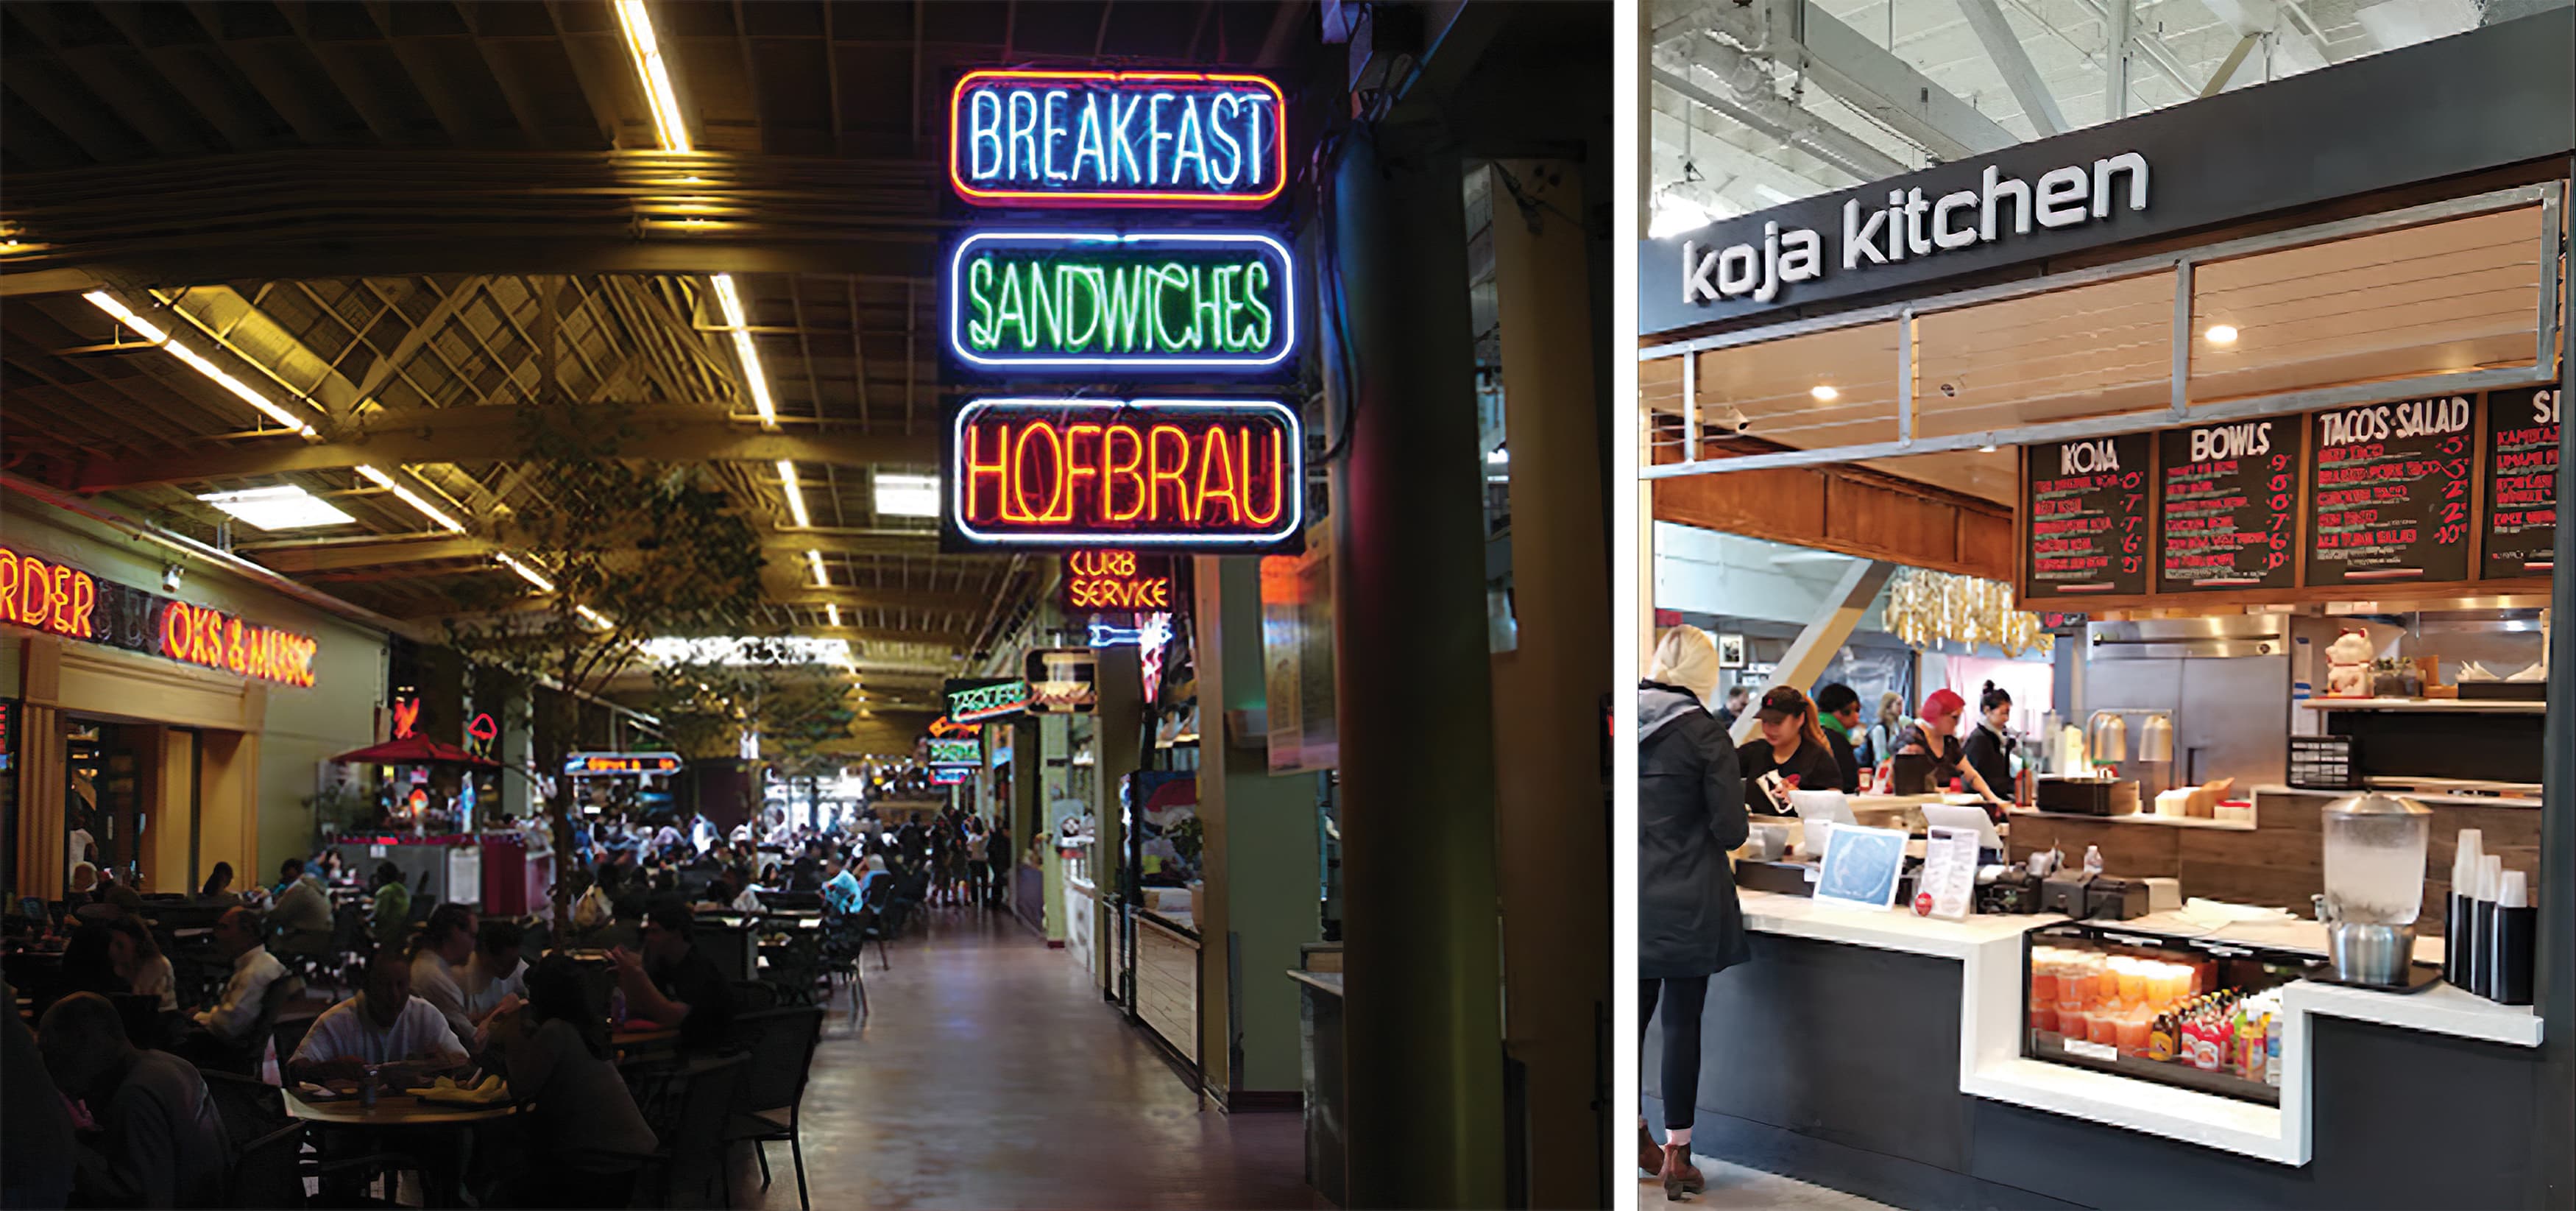 RSM Design worked with TMG Partners to develop signage and wayfinding program for Public Market, a dining and shopping center in San Francisco, California.